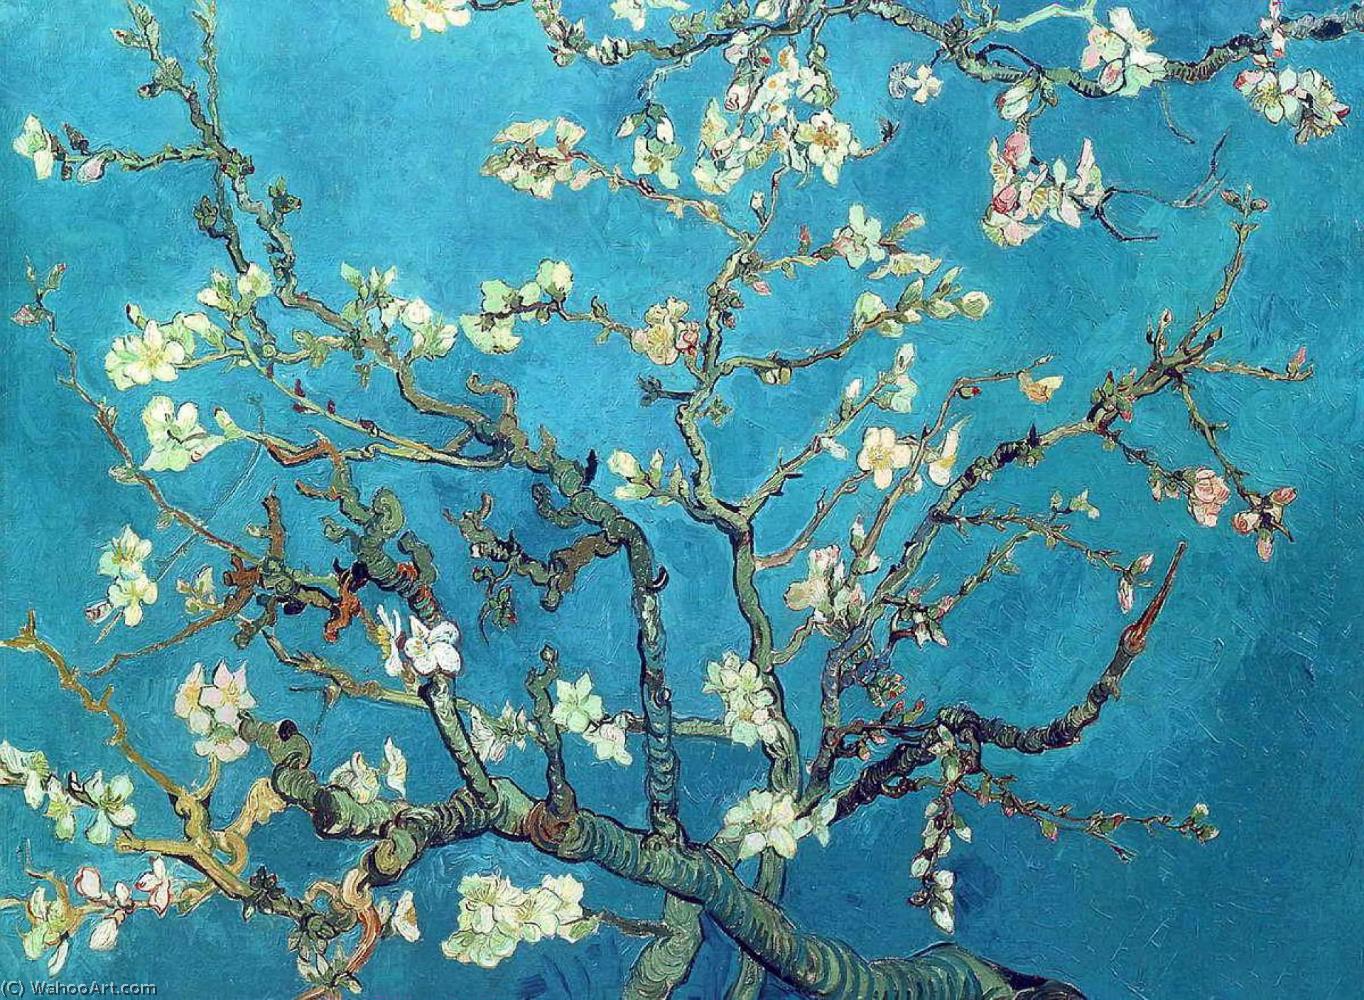 Vincent Van Gogh, Branches_with_Almond_Blossom